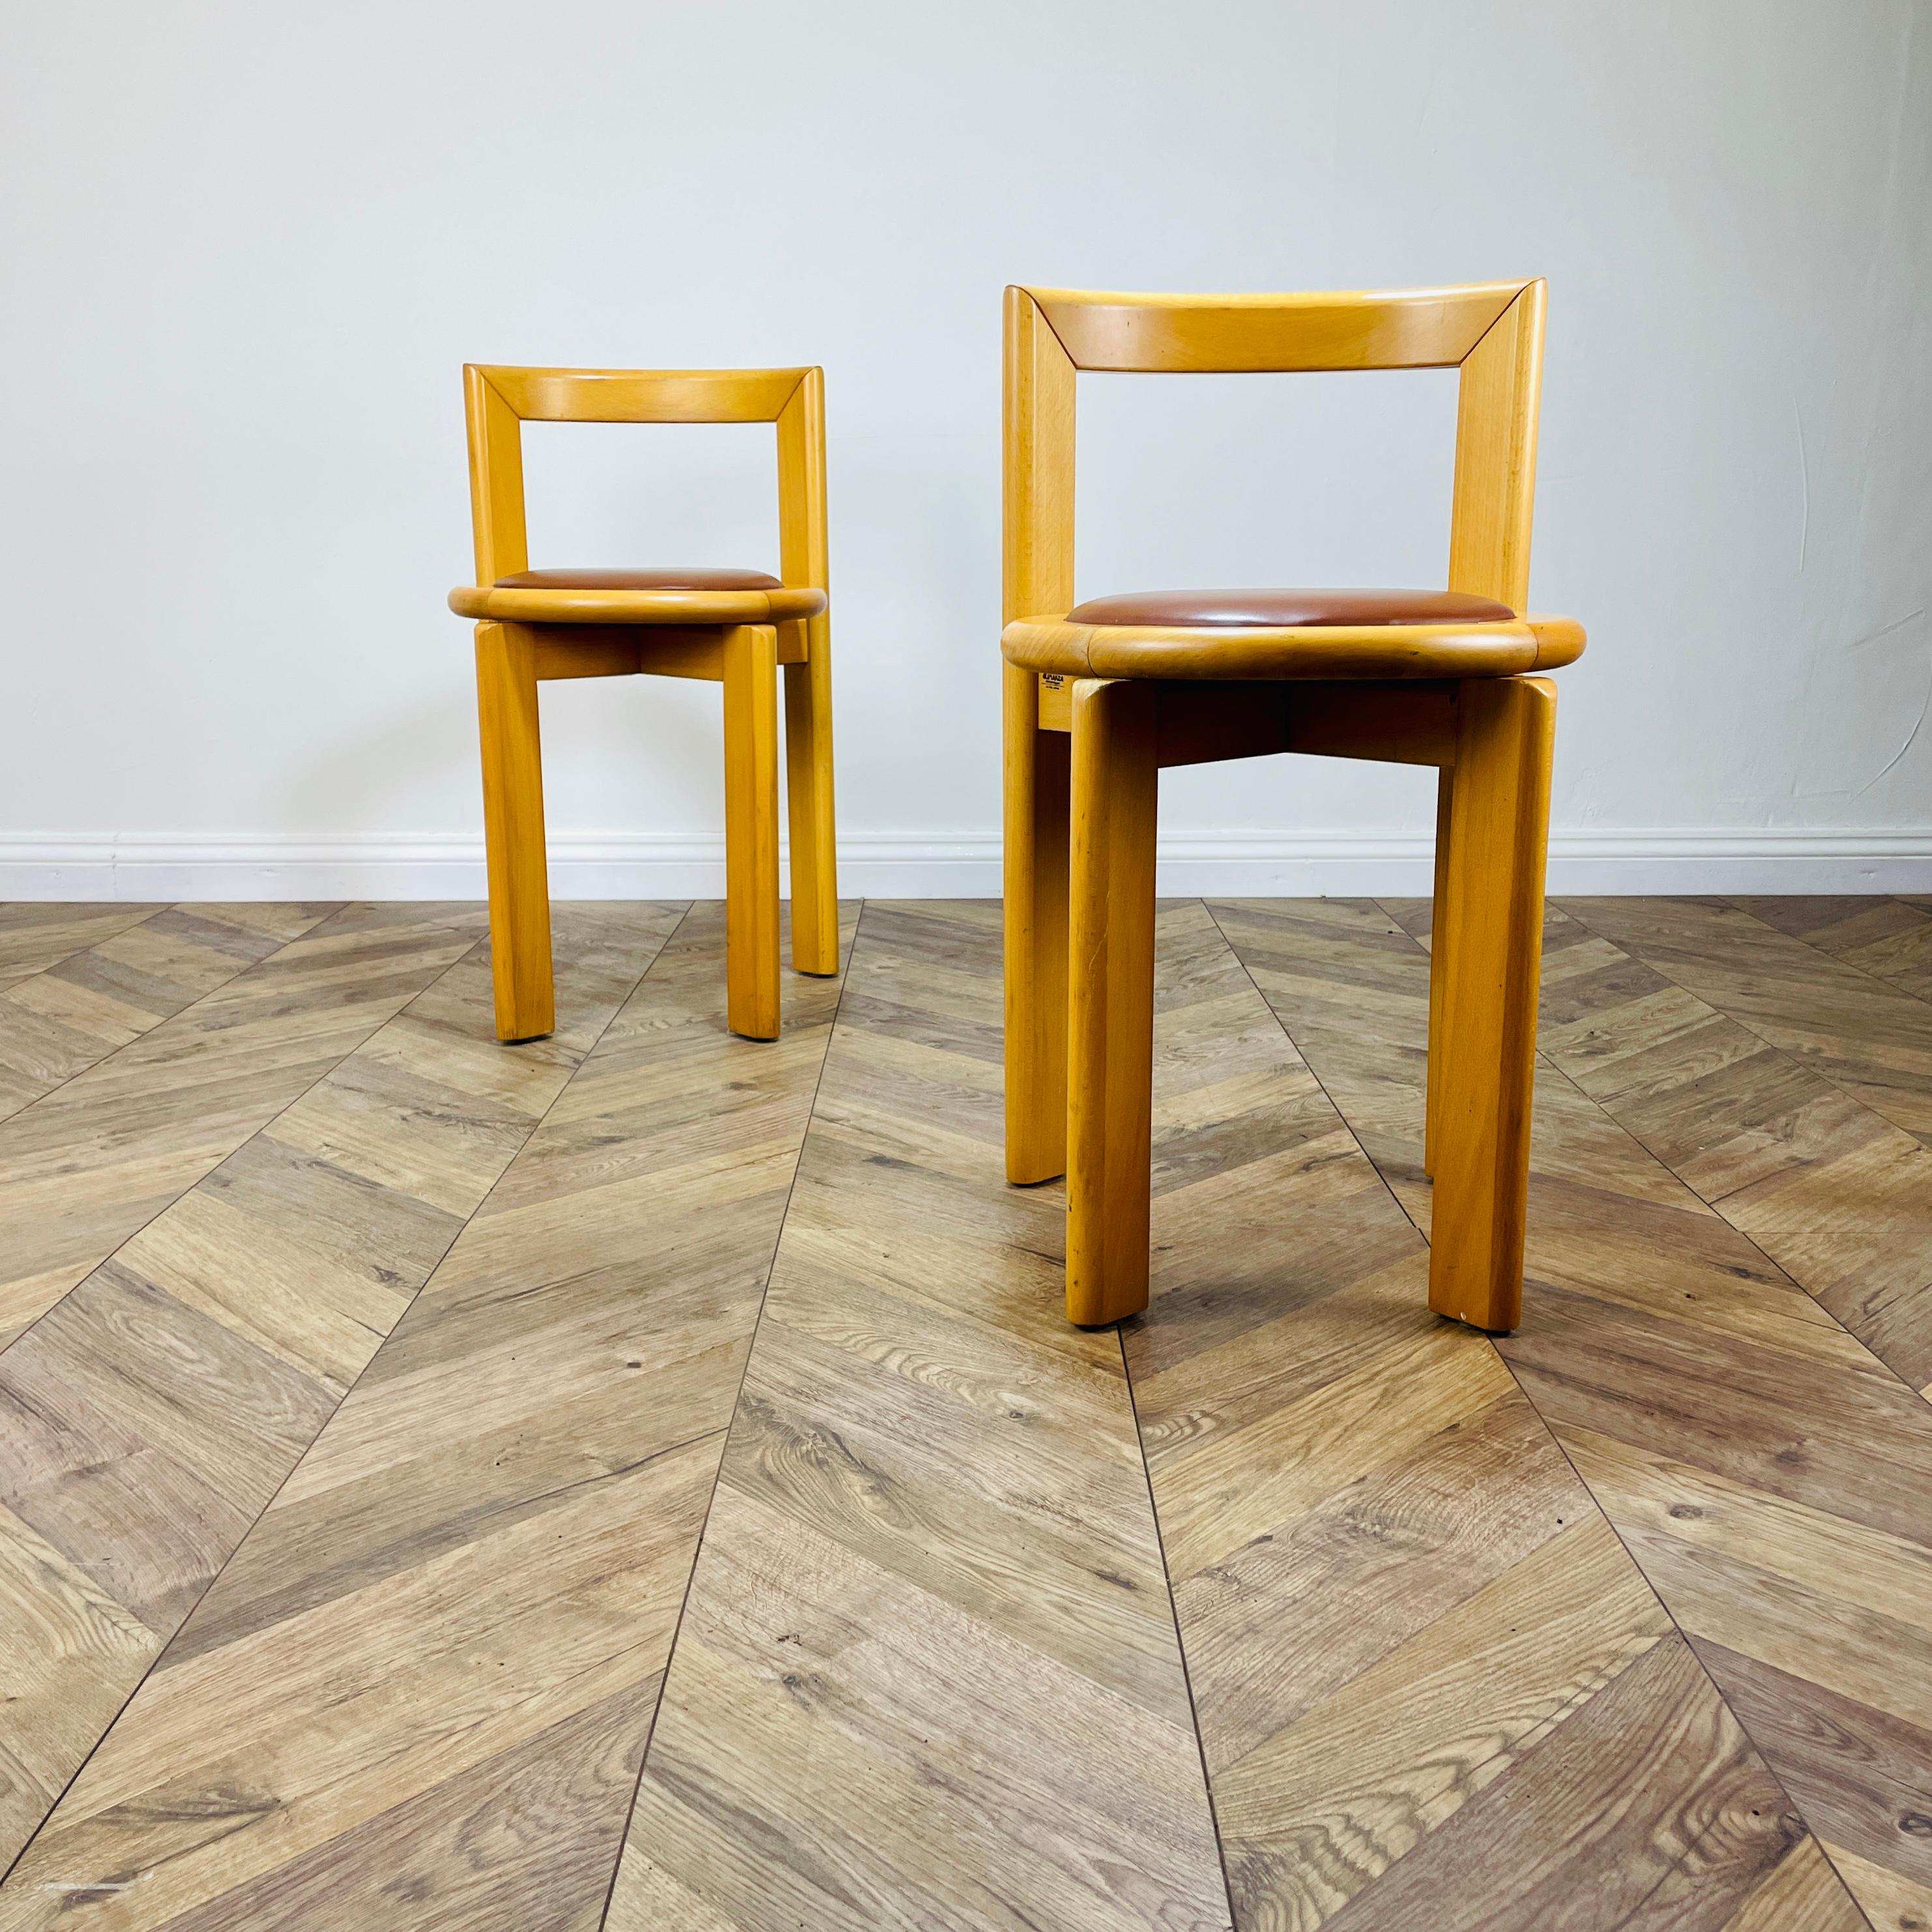 Modernist Chairs inspired by Bruno Rey, Made by Glimåkra of Sweden, Set of 2 6